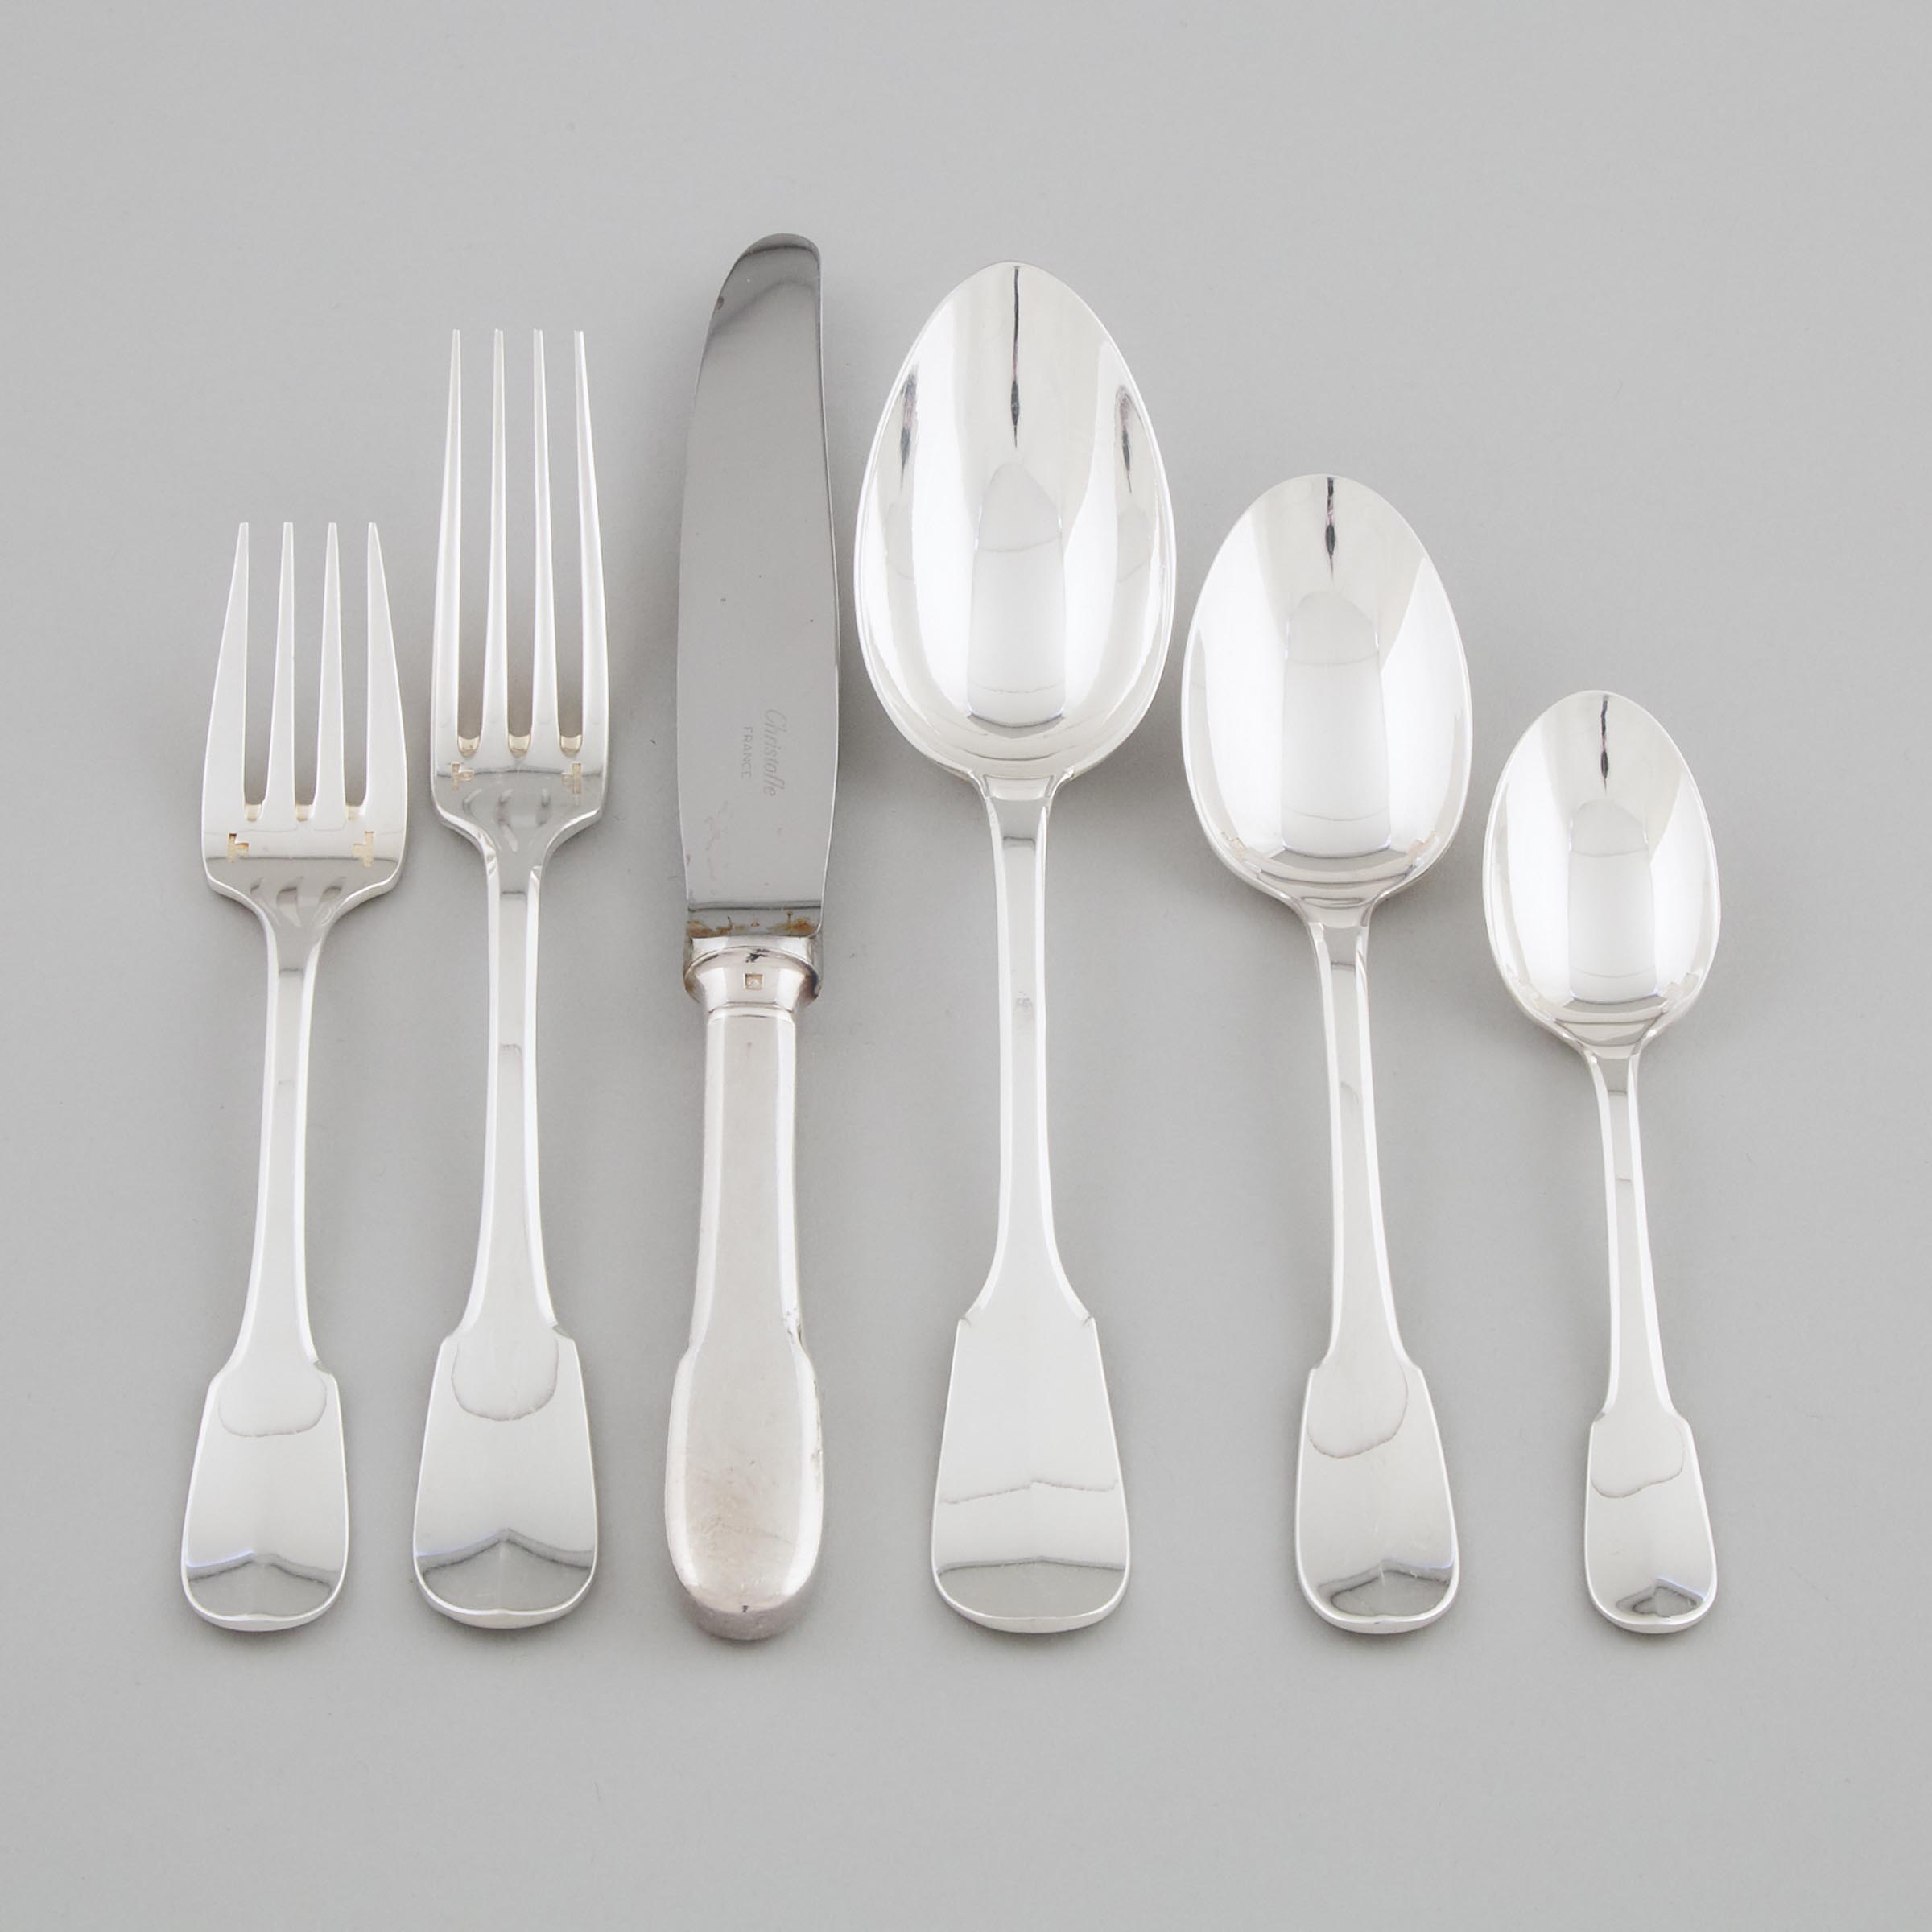 French Silver Plated 'Cluny' Pattern Flatware Service, Christofle, 20th century